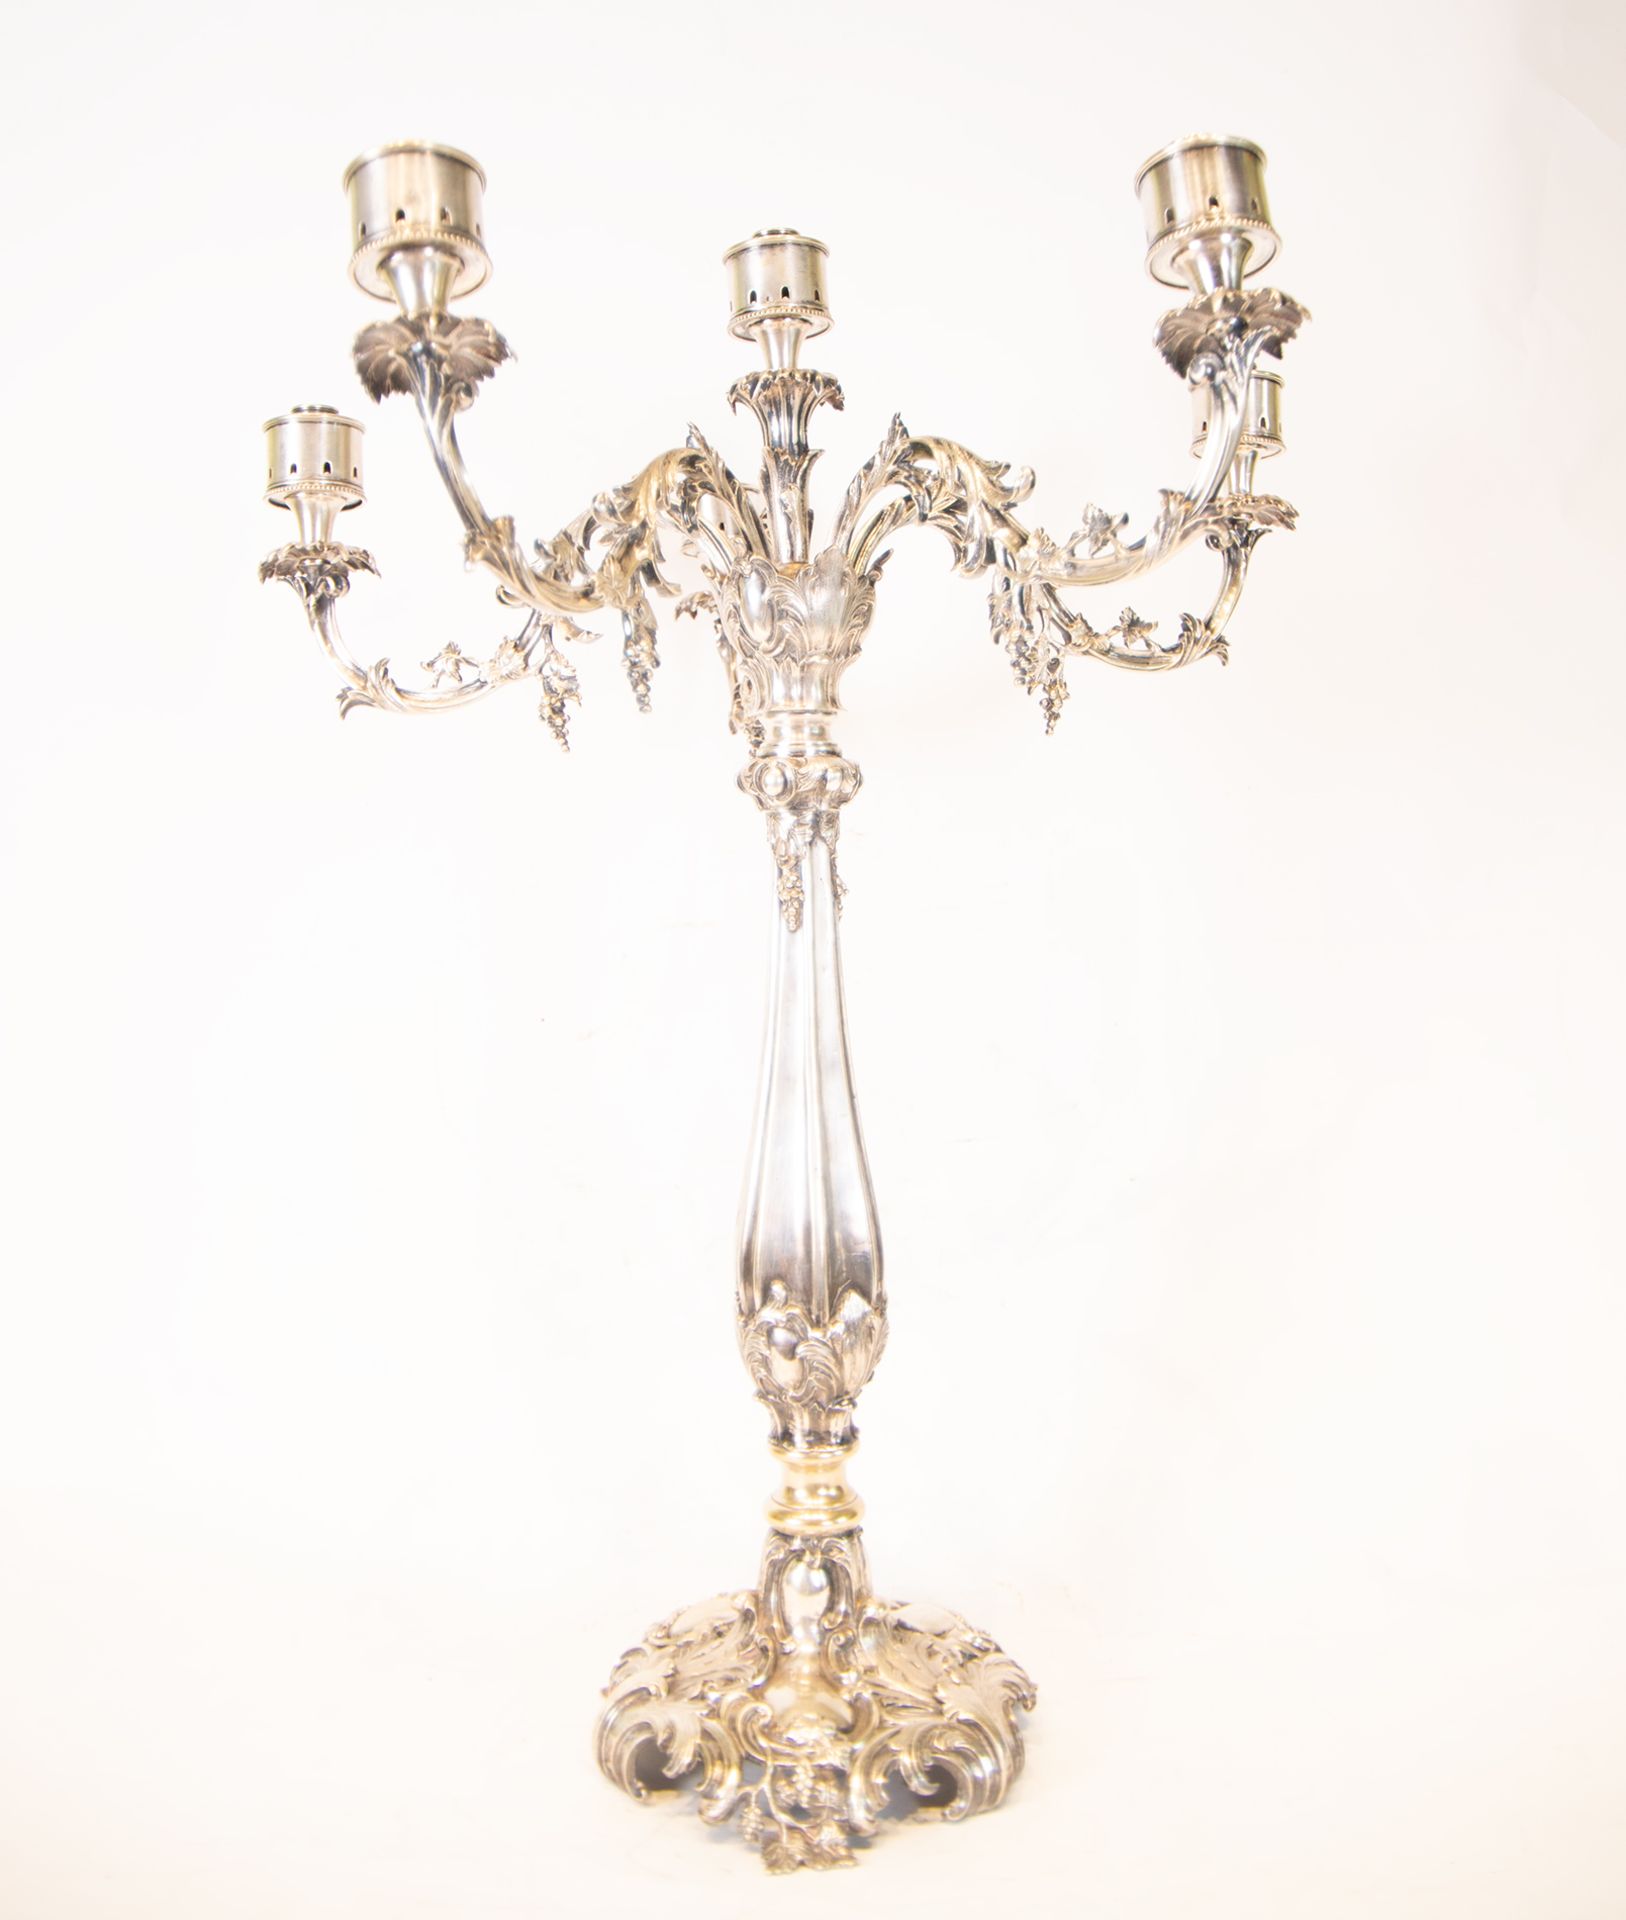 Large Pair of Victorian-style Silver-Gilt Candelabra, 19th century - Image 5 of 7